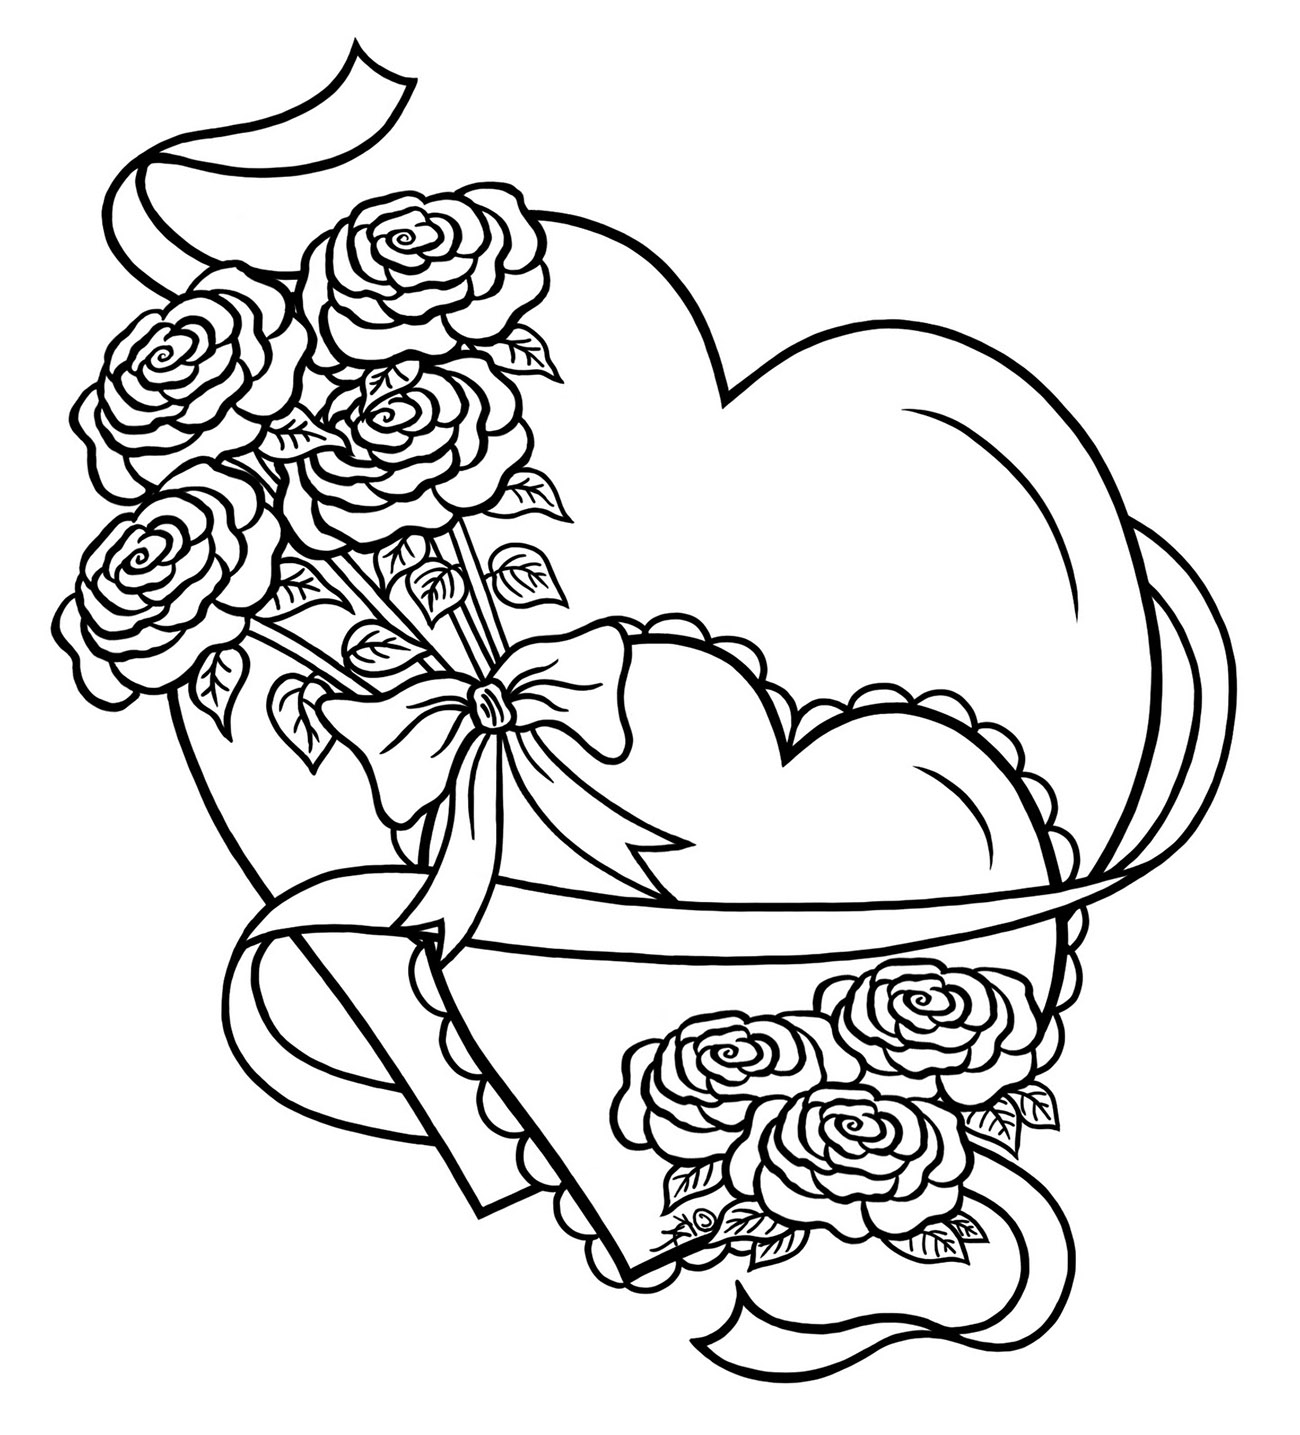 Coloring page love simple heart with flowers